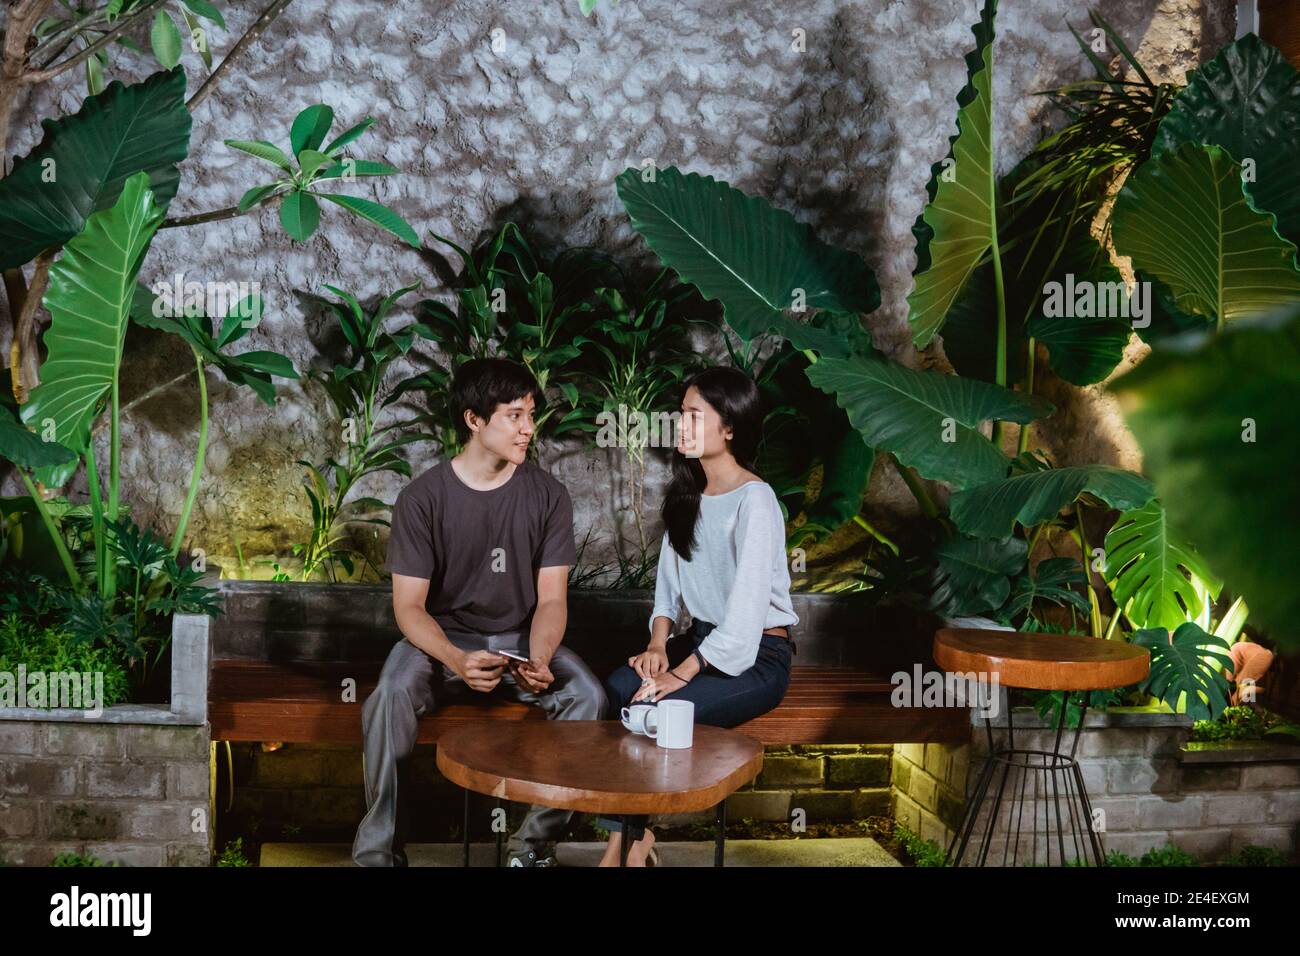 dating a couple of asian teenagers sitting on wooden benches in the garden of the house Stock Photo